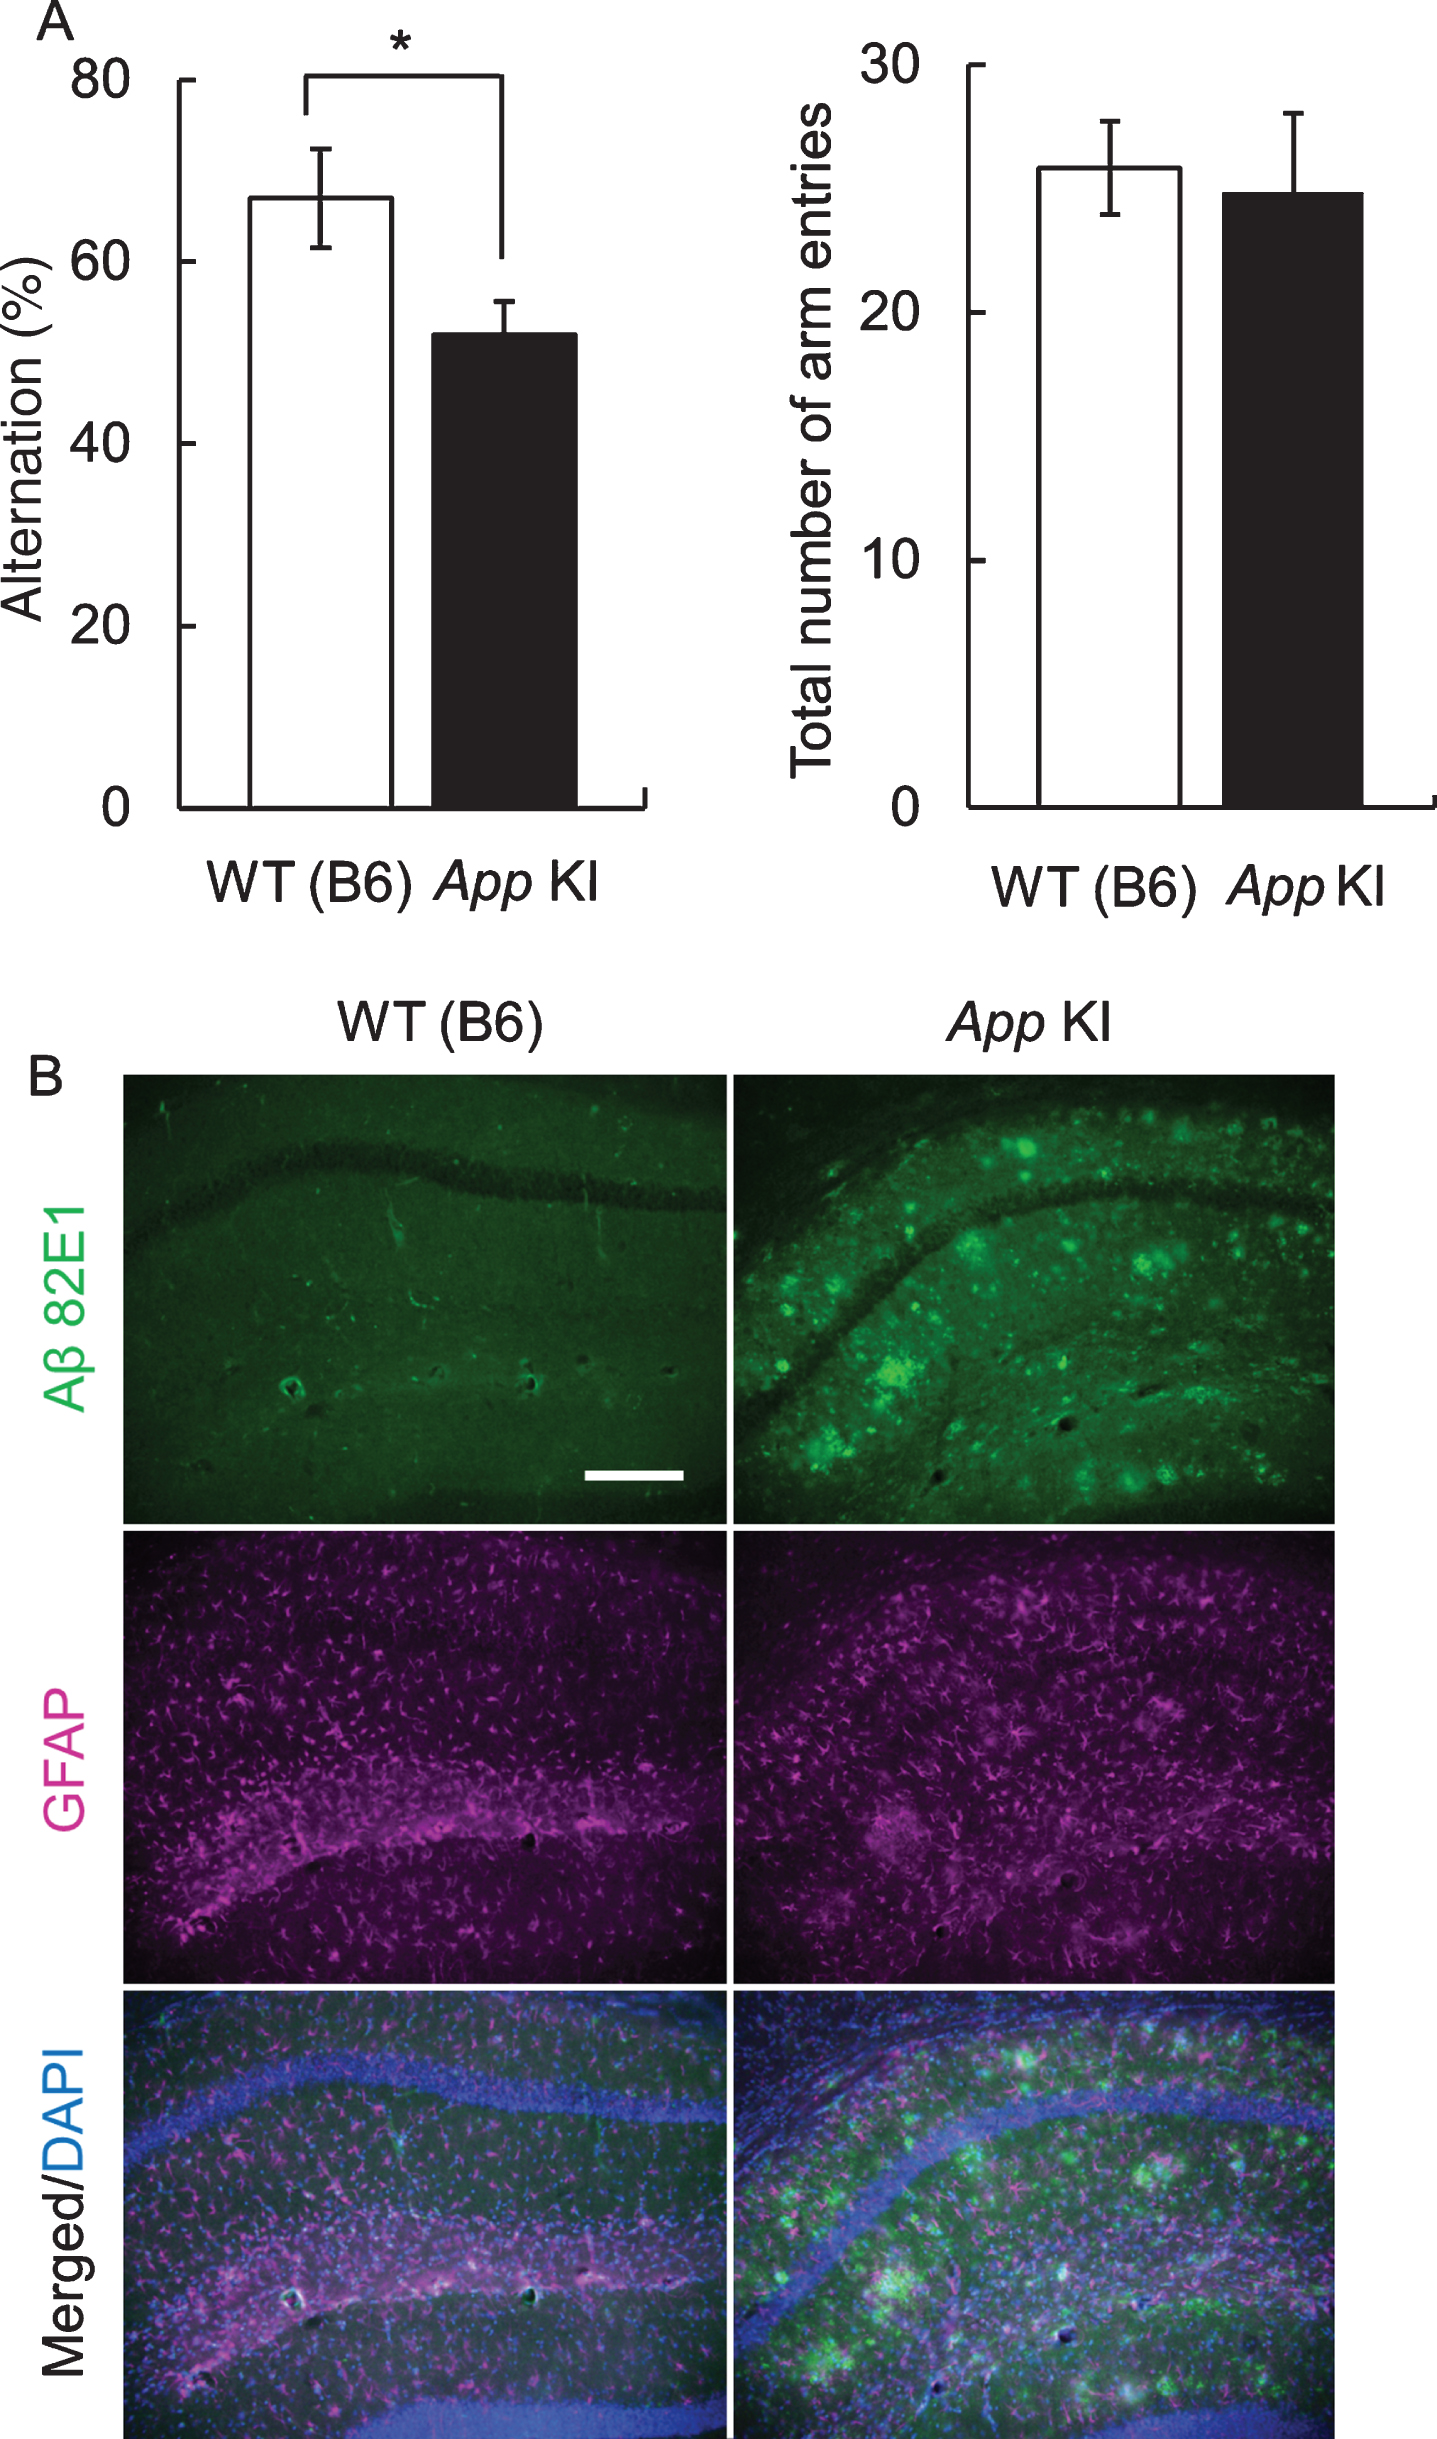 Cognitive impairment and neuropathology of App knock-in (KI) mice. A) Cognitive impairment in App KI mice. The Y-maze test was performed using 12-month-old wild type (WT) and App KI mice. *p < 0.05 (Welch’s t-test, n = 6). B) Aβ deposition of WT and App KI mice. The hippocampus samples wereprepared from 18-month-old mice that had completed the behavioral experiments. Representative images of the hippocampal regions from coronal brain sections immuno stained with anti-Aβ 82E1 (green) and anti-GFAP (magenta) are shown (blue in merged images indicated DAPI staining). Scale bar is 50μm.